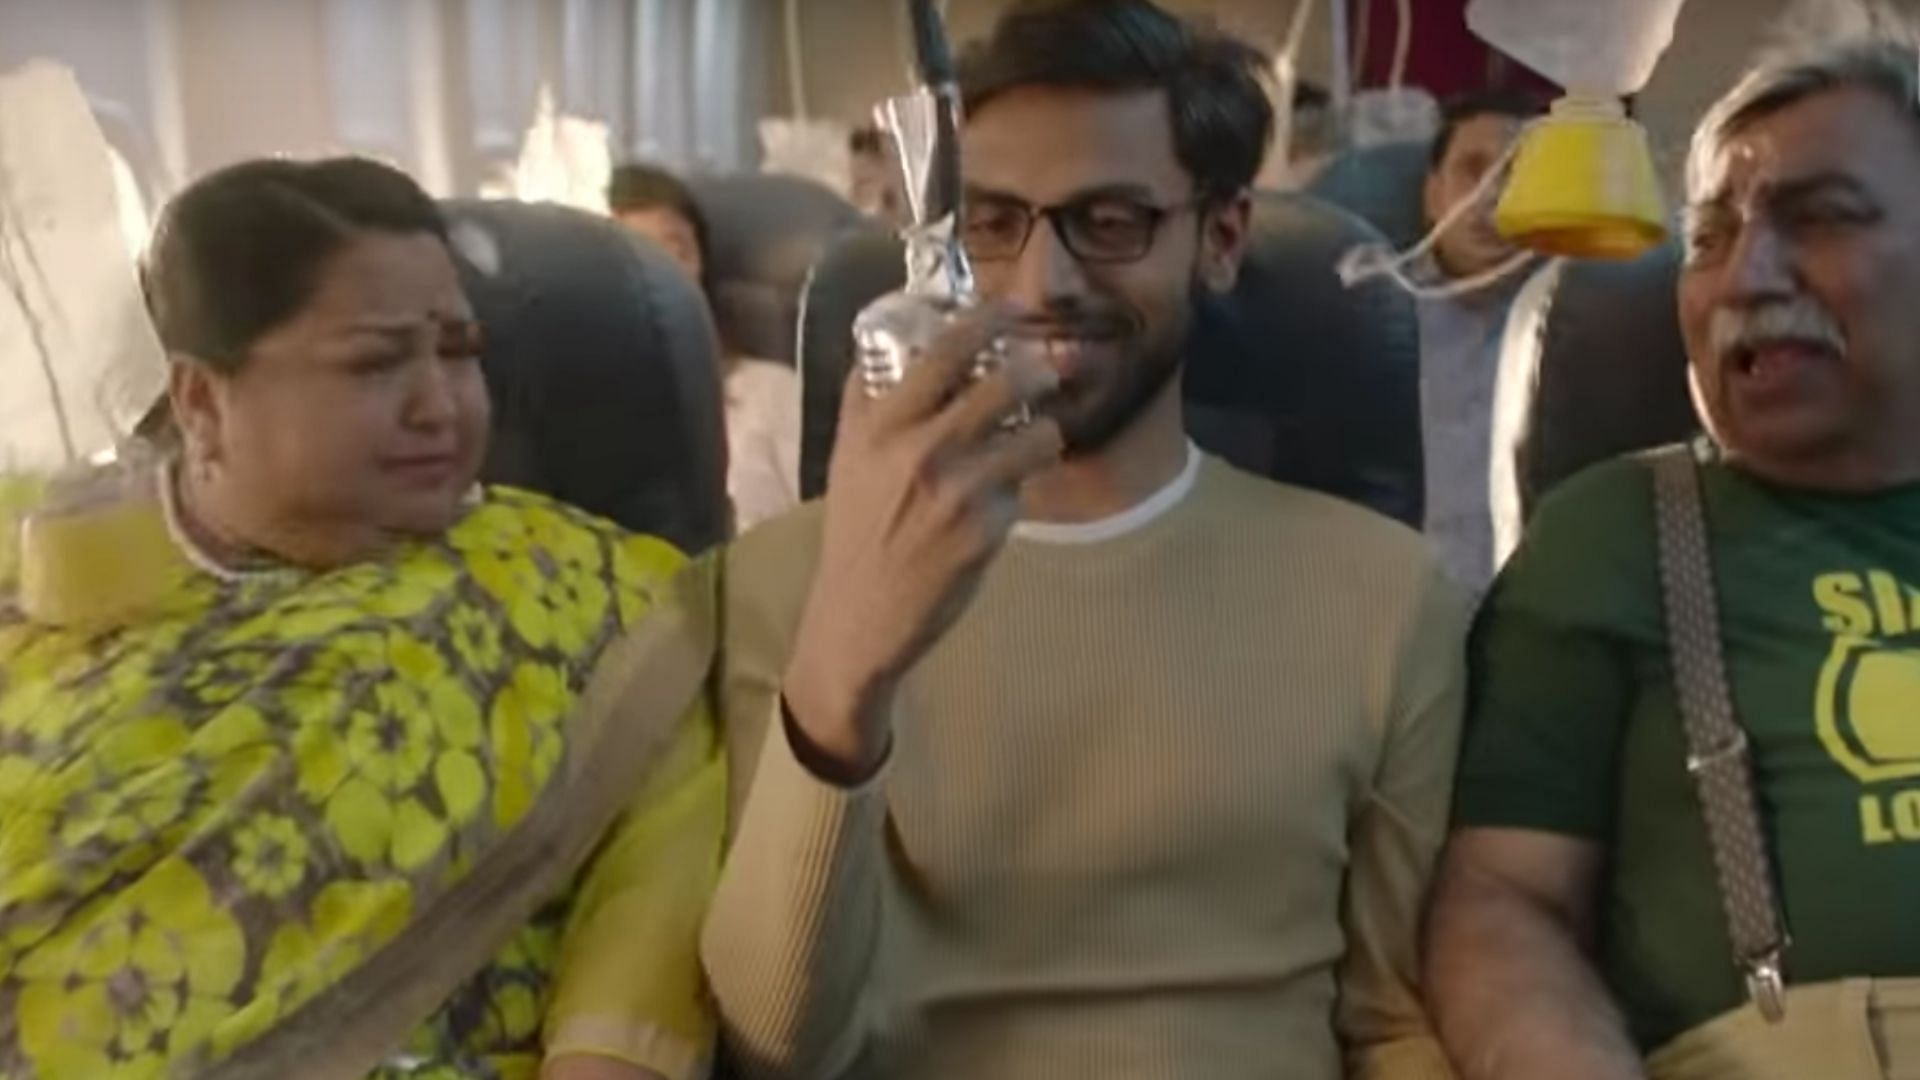 Biswa Kalyan Rath is one of the judges on season 2 of Amazon Prime Video’s <i>Comicstaan.</i>